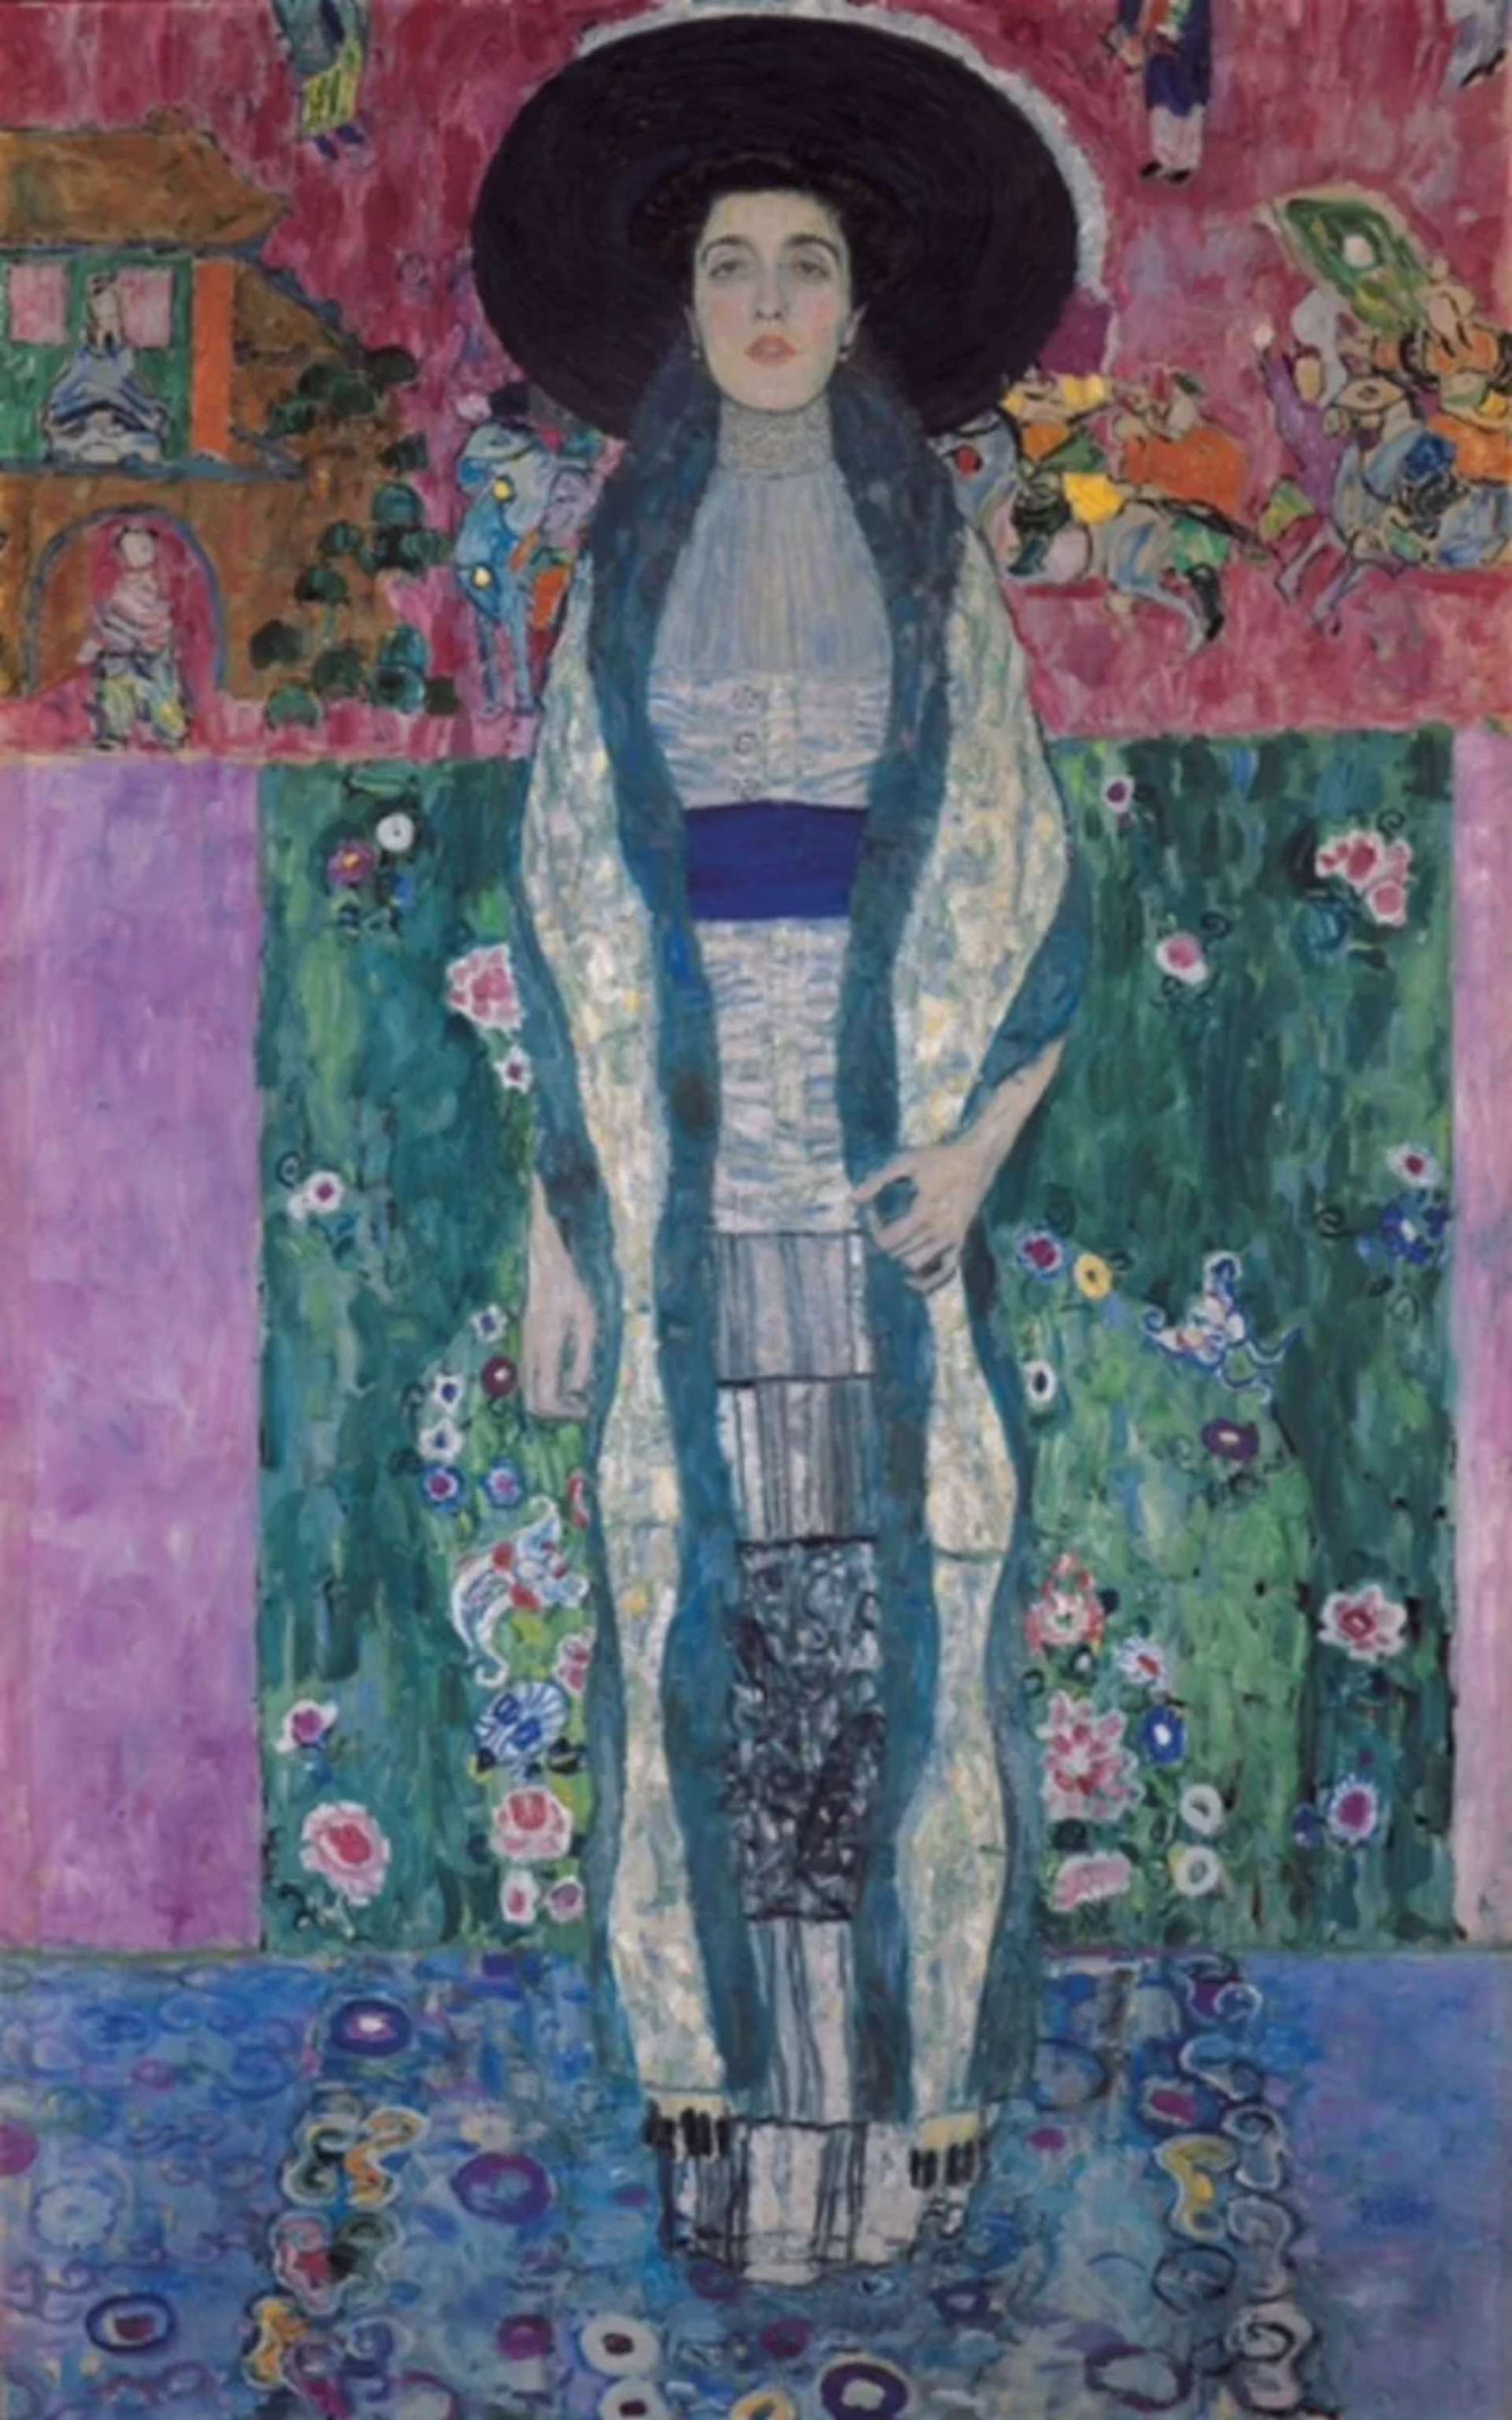 Gustav Klimt’s Portrait of Adele Bloch-Bauer II. An oil painting of a woman wearing shades of blue and a hat. She is in a room decorated with flowers.